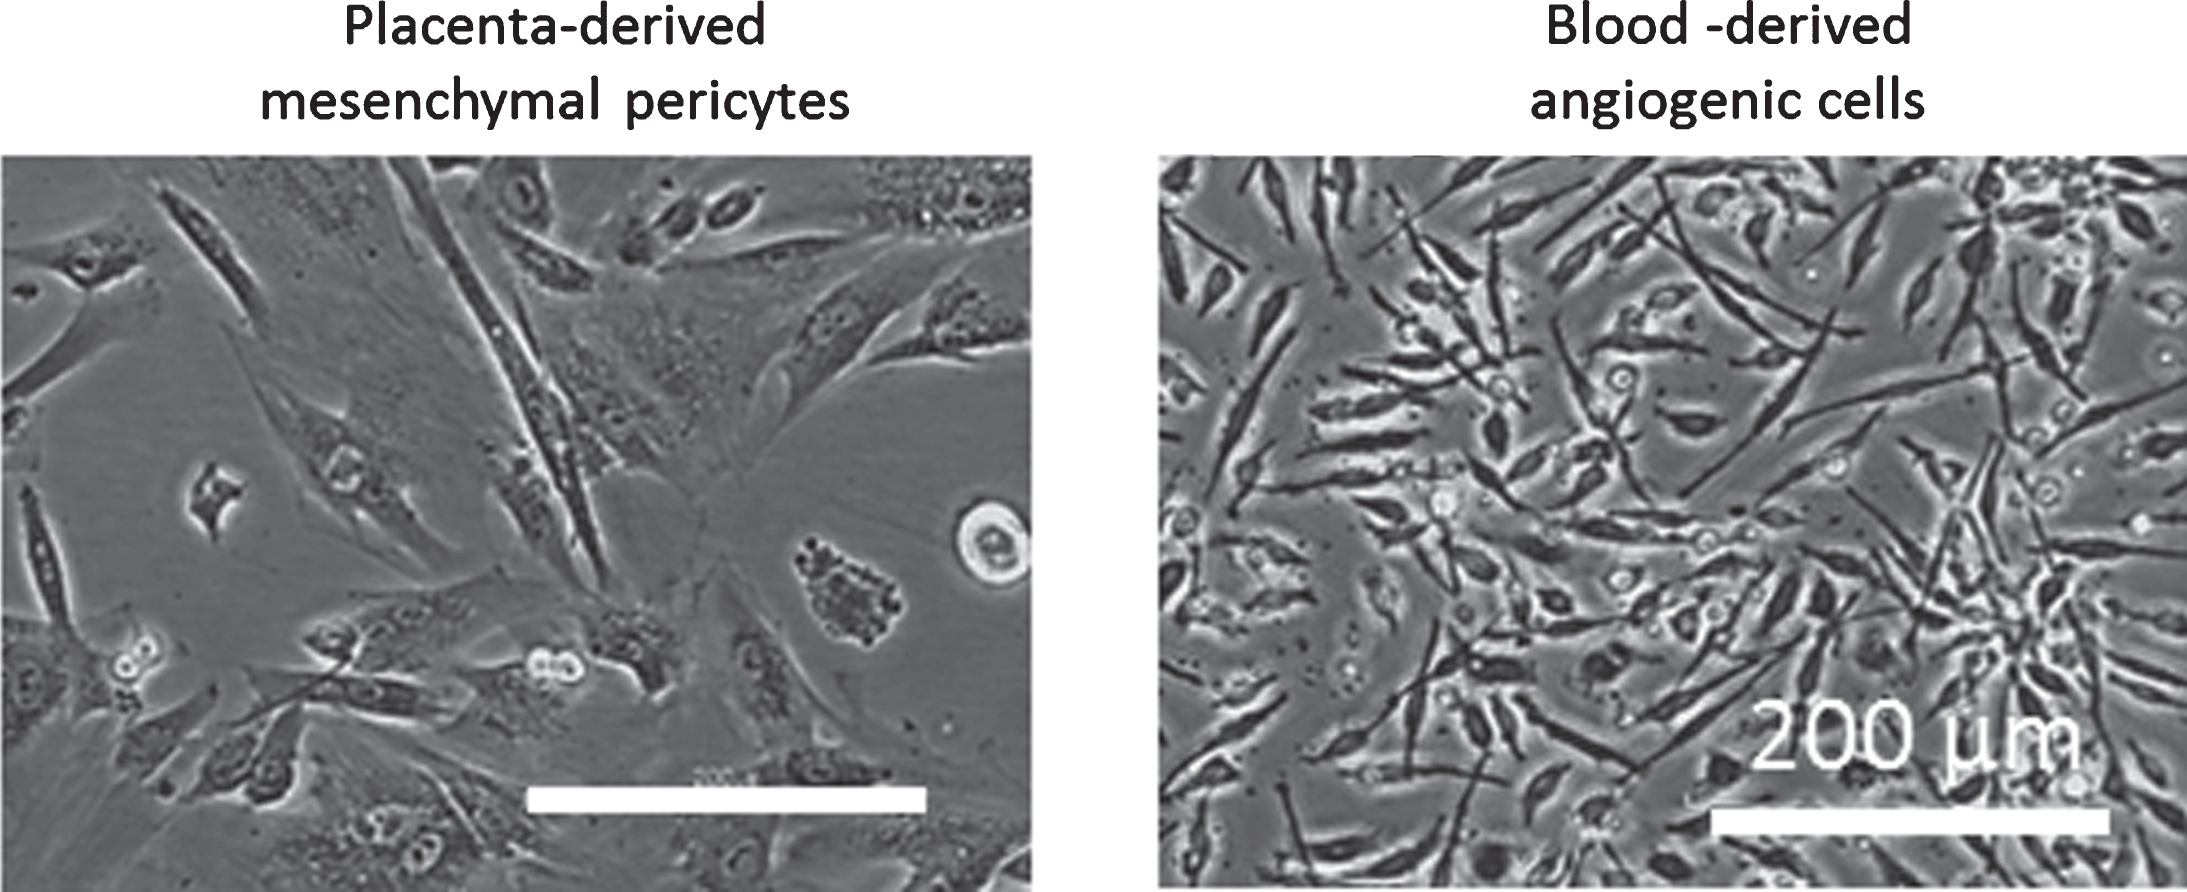 Phase contrast images of placenta-derived mesenchymal pericytes and blood-derived angiogenic cells, which resemble hematopoietic pericytes.